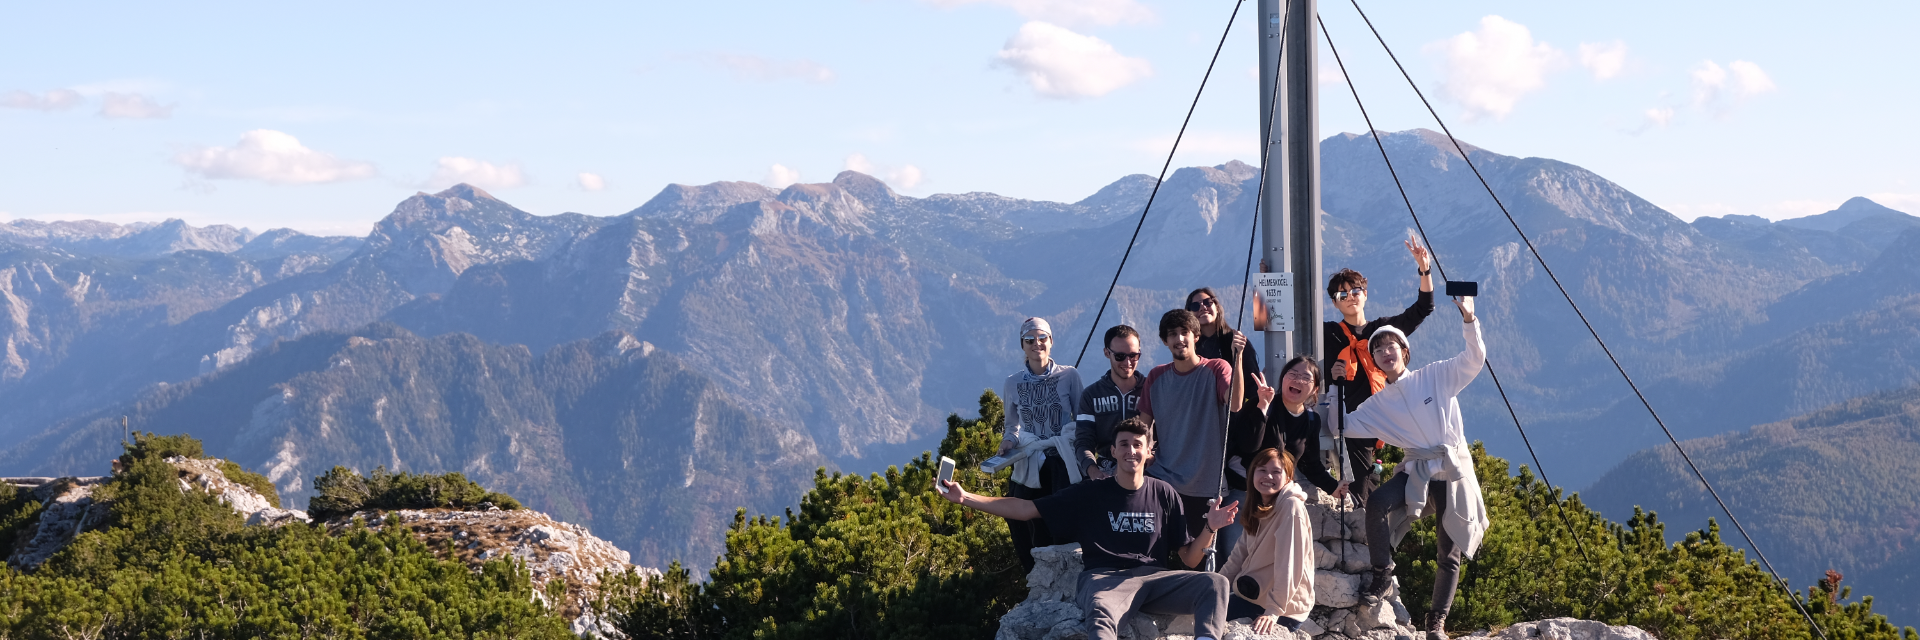 About Student Exchange Programmes – Outbound